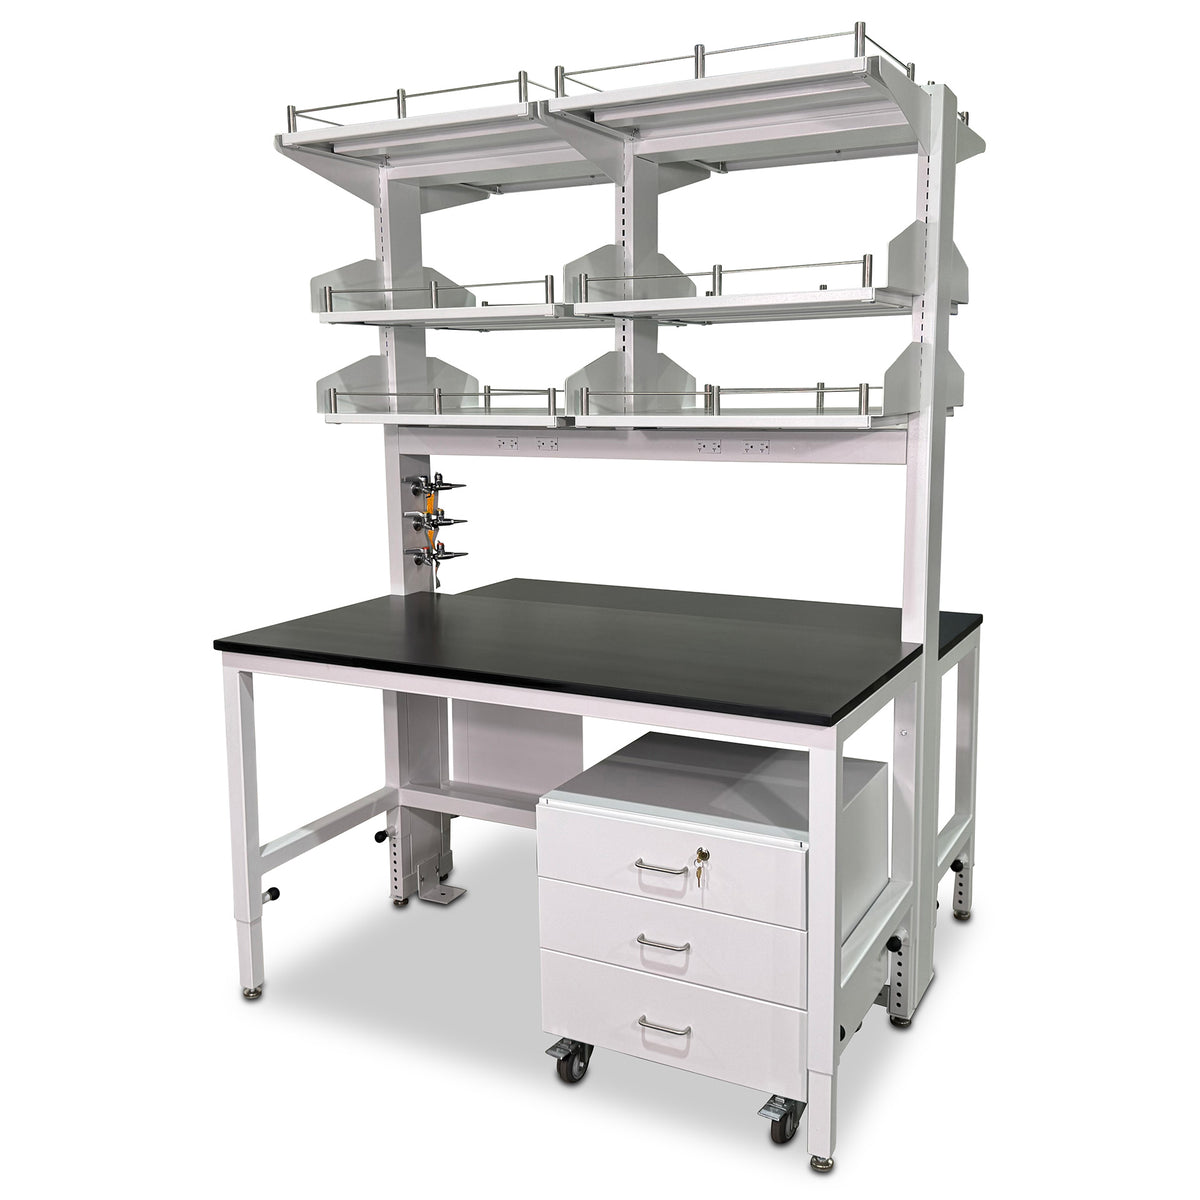 Avatar Lab Bench System - 04 - Double